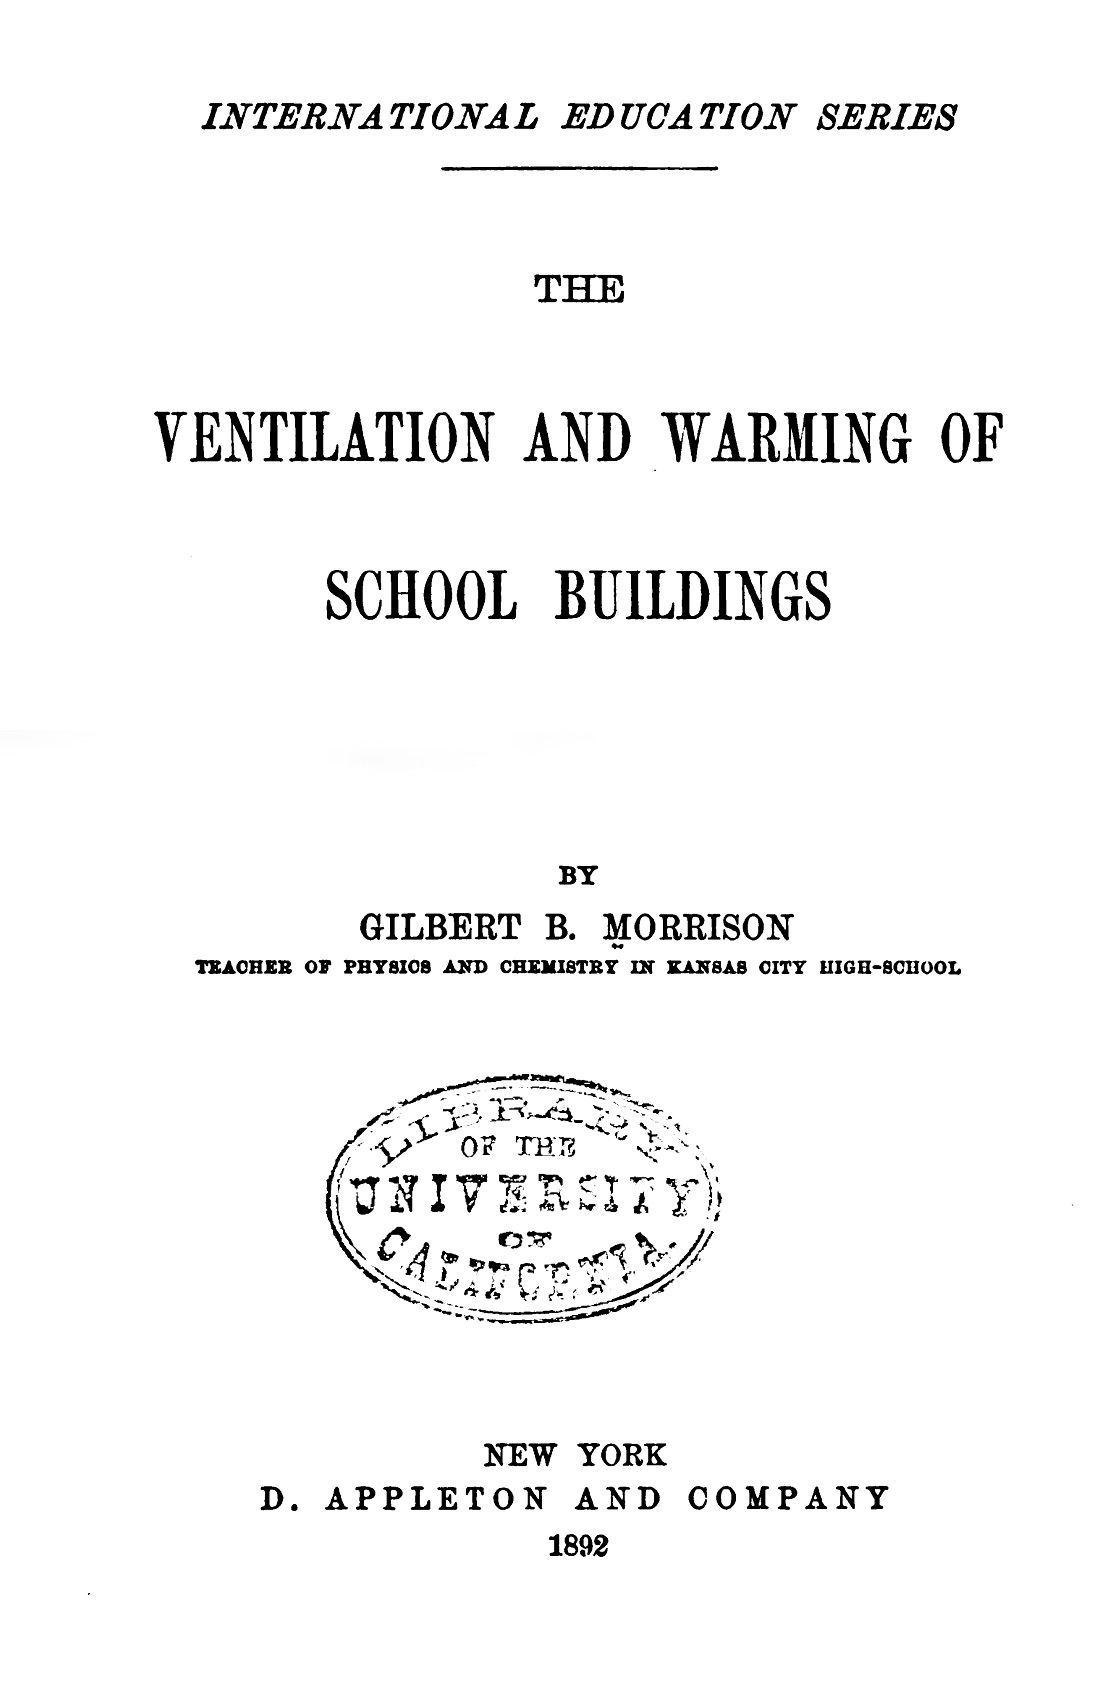 ‘The Ventilation and Warming of School Buildings’ (1887) by Gilbert B. Morrison.